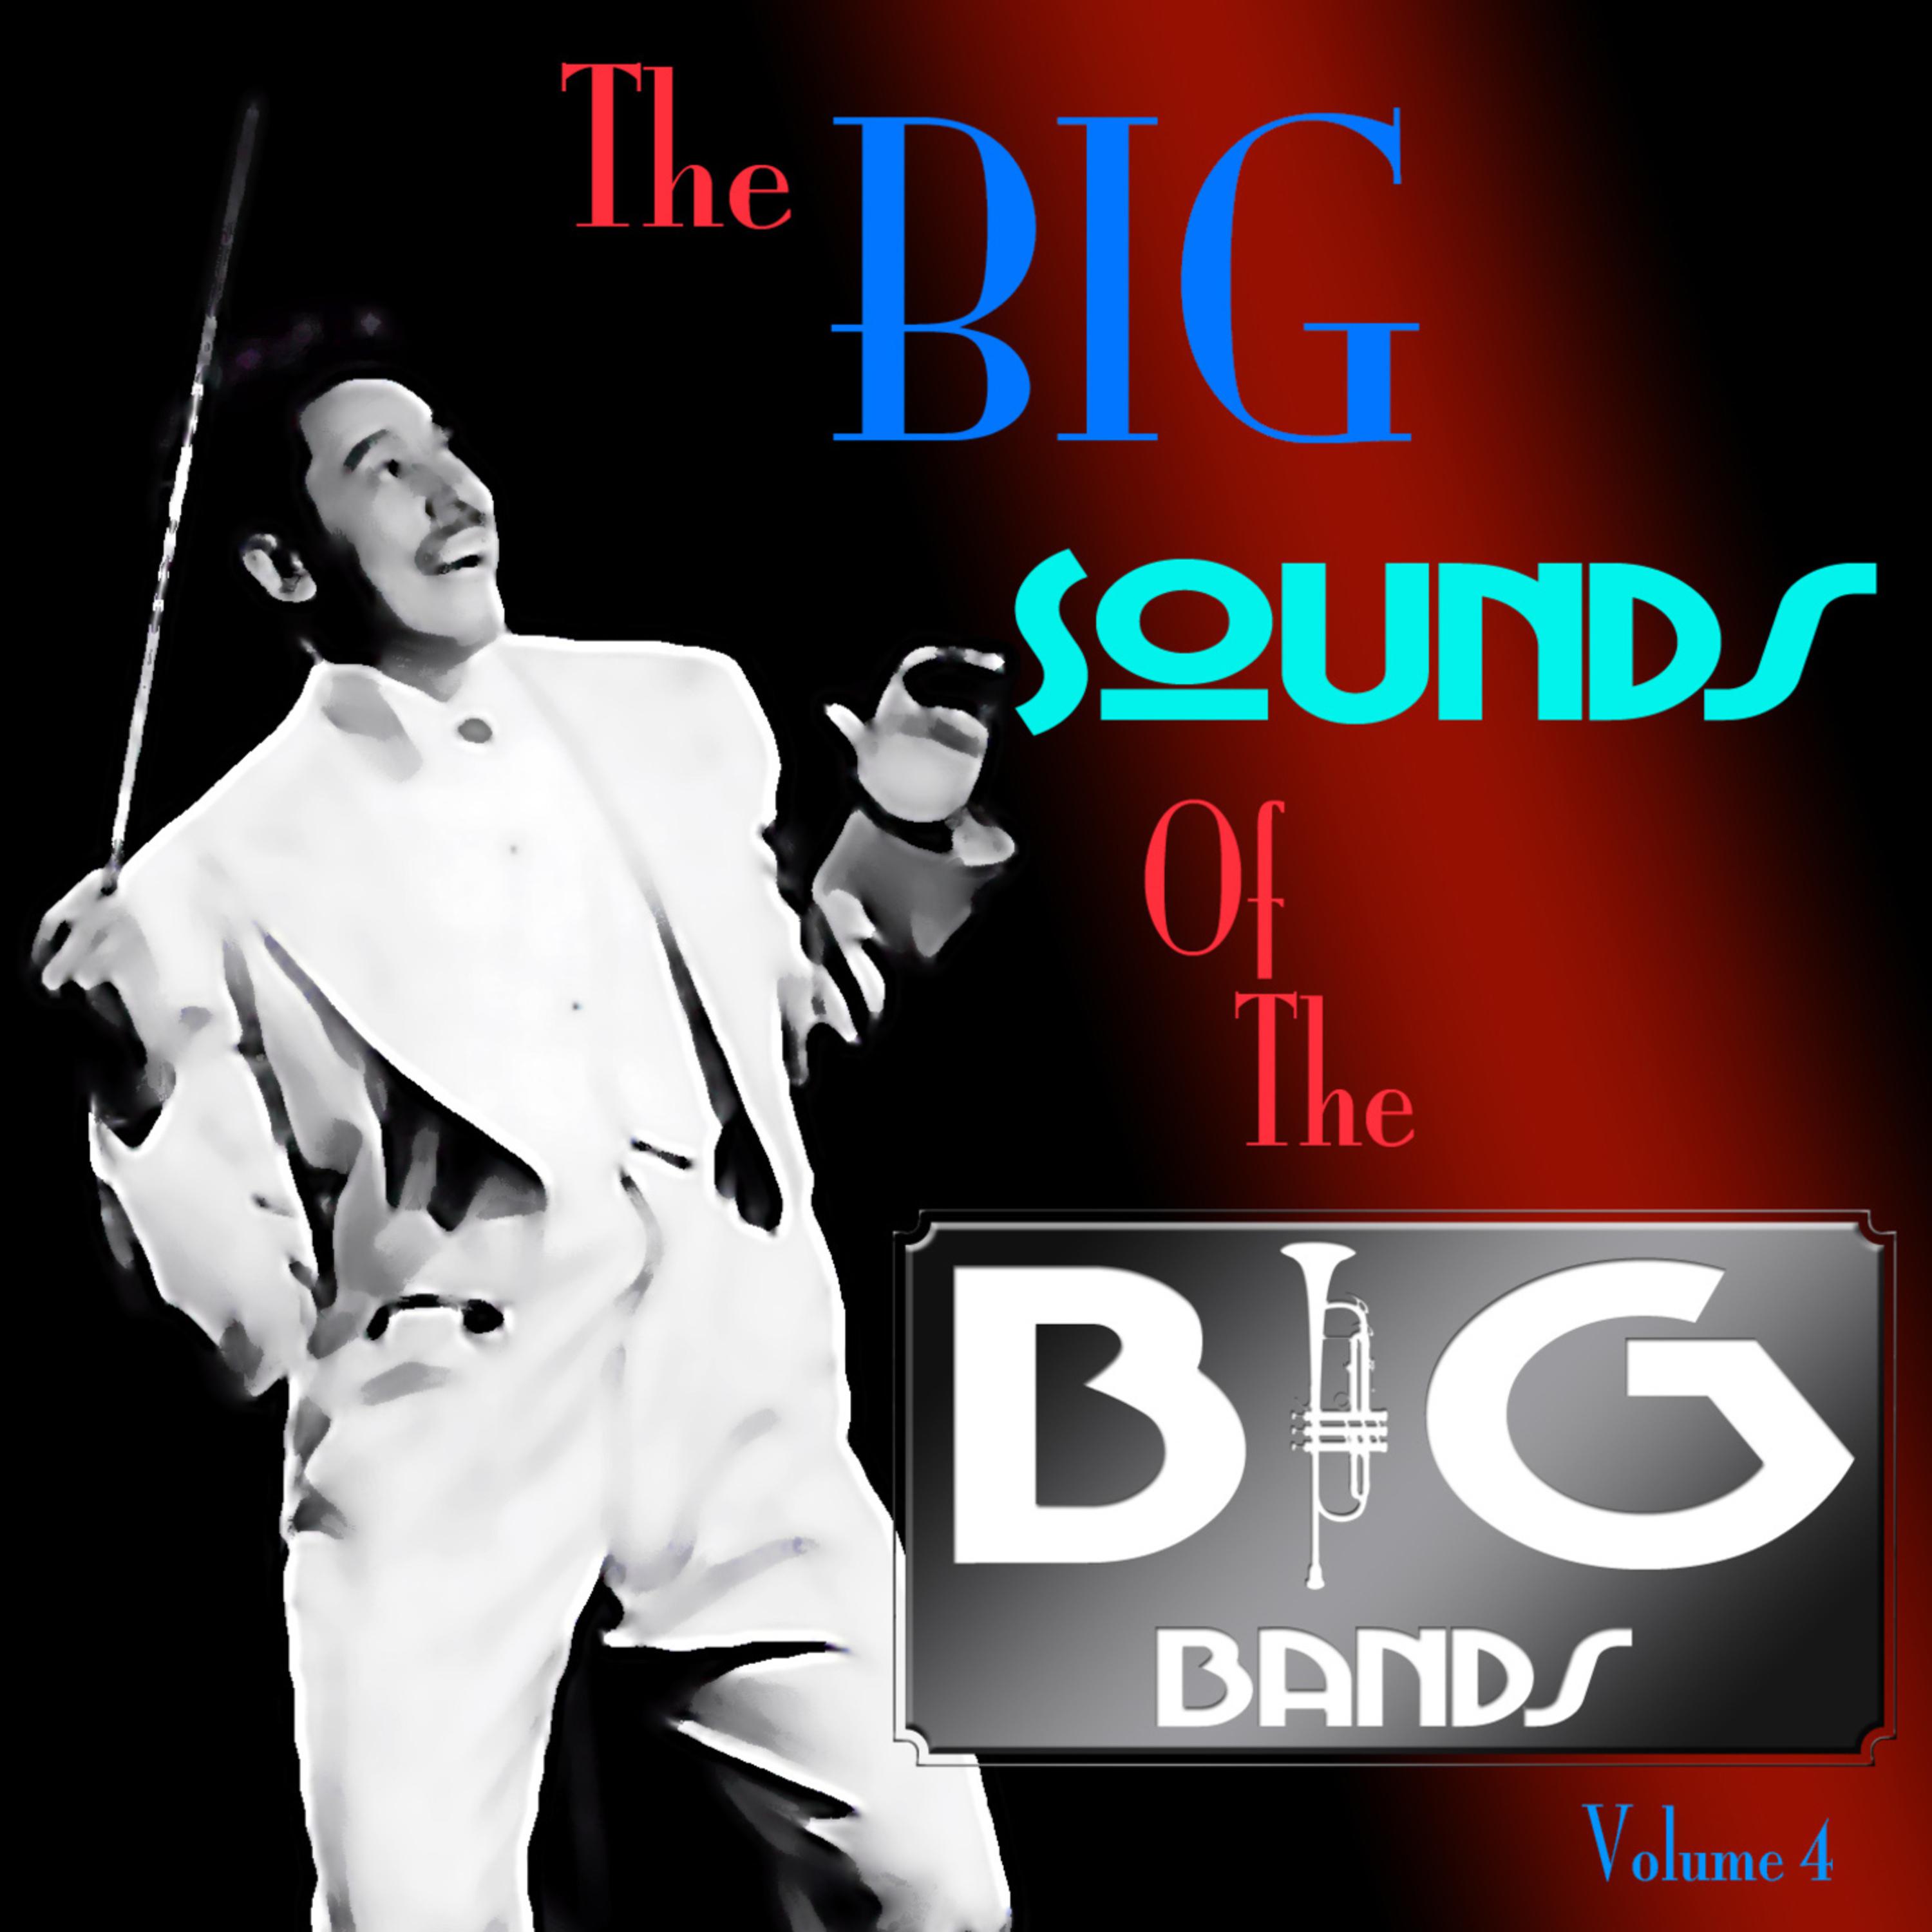 The Big Sound Of The Big Bands Volume 4